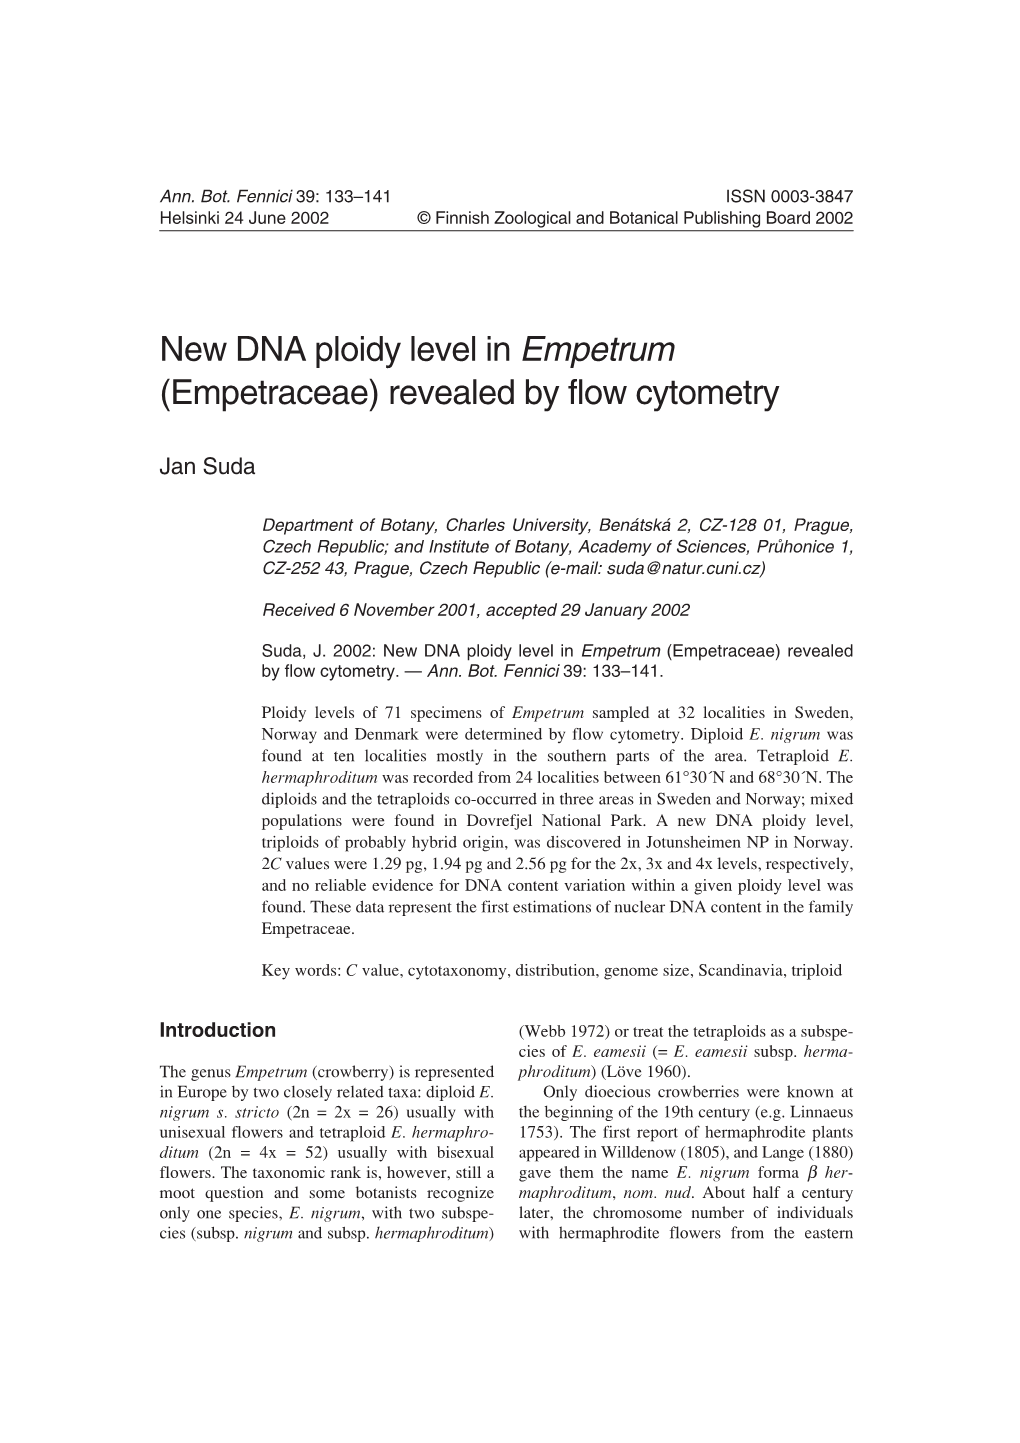 New DNA Ploidy Level in Empetrum (Empetraceae) Revealed by Flow Cytometry